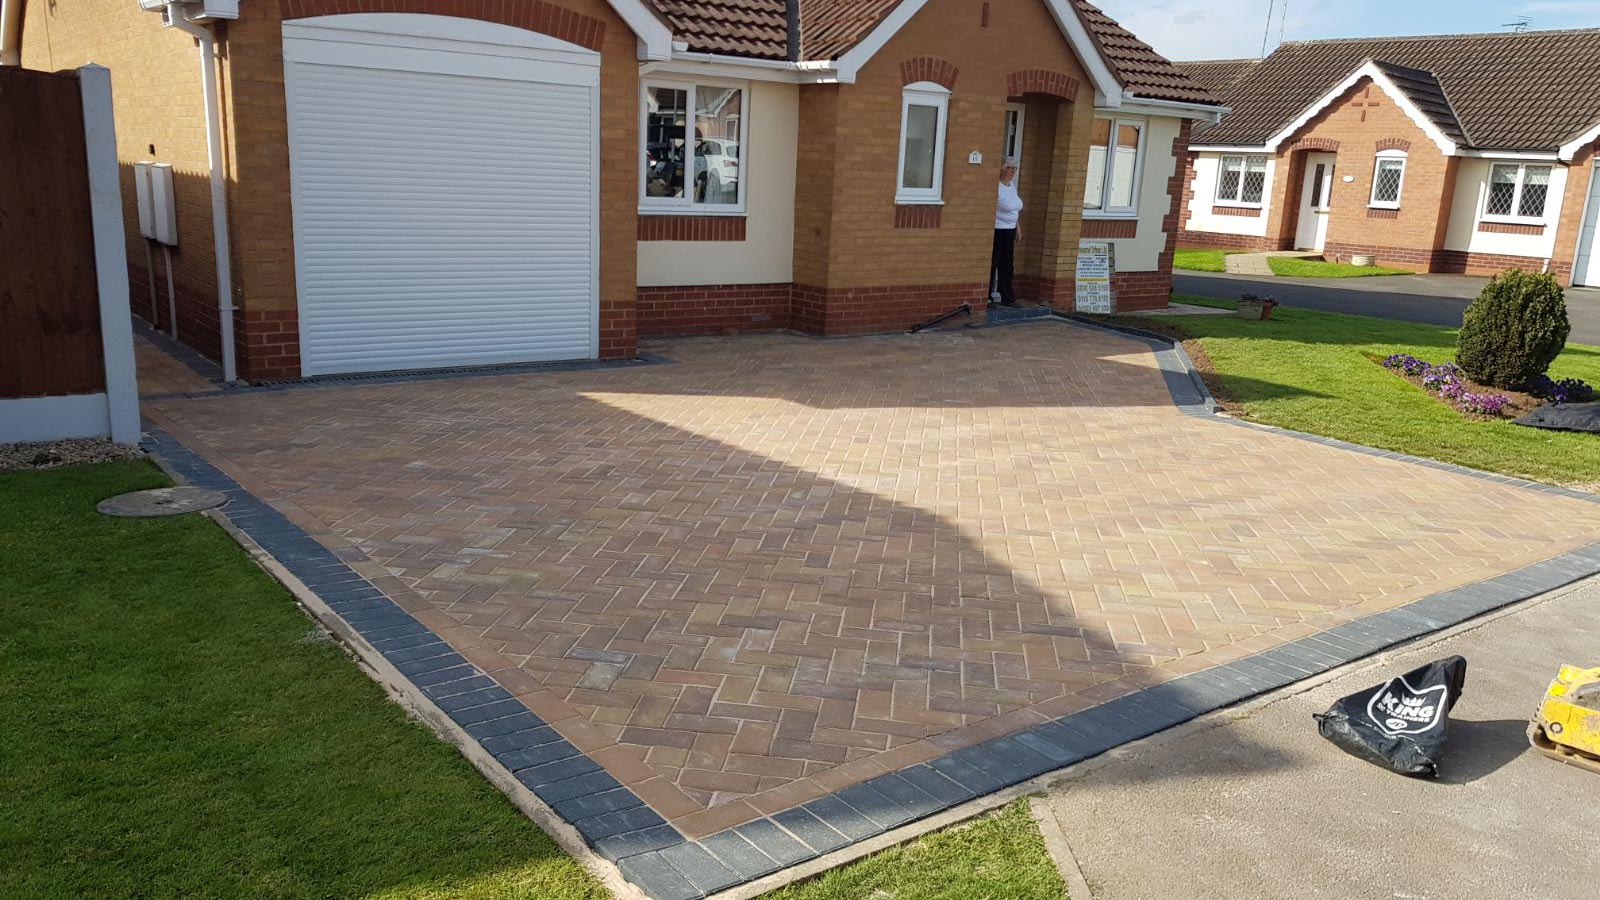 A brand new driveway outside a home